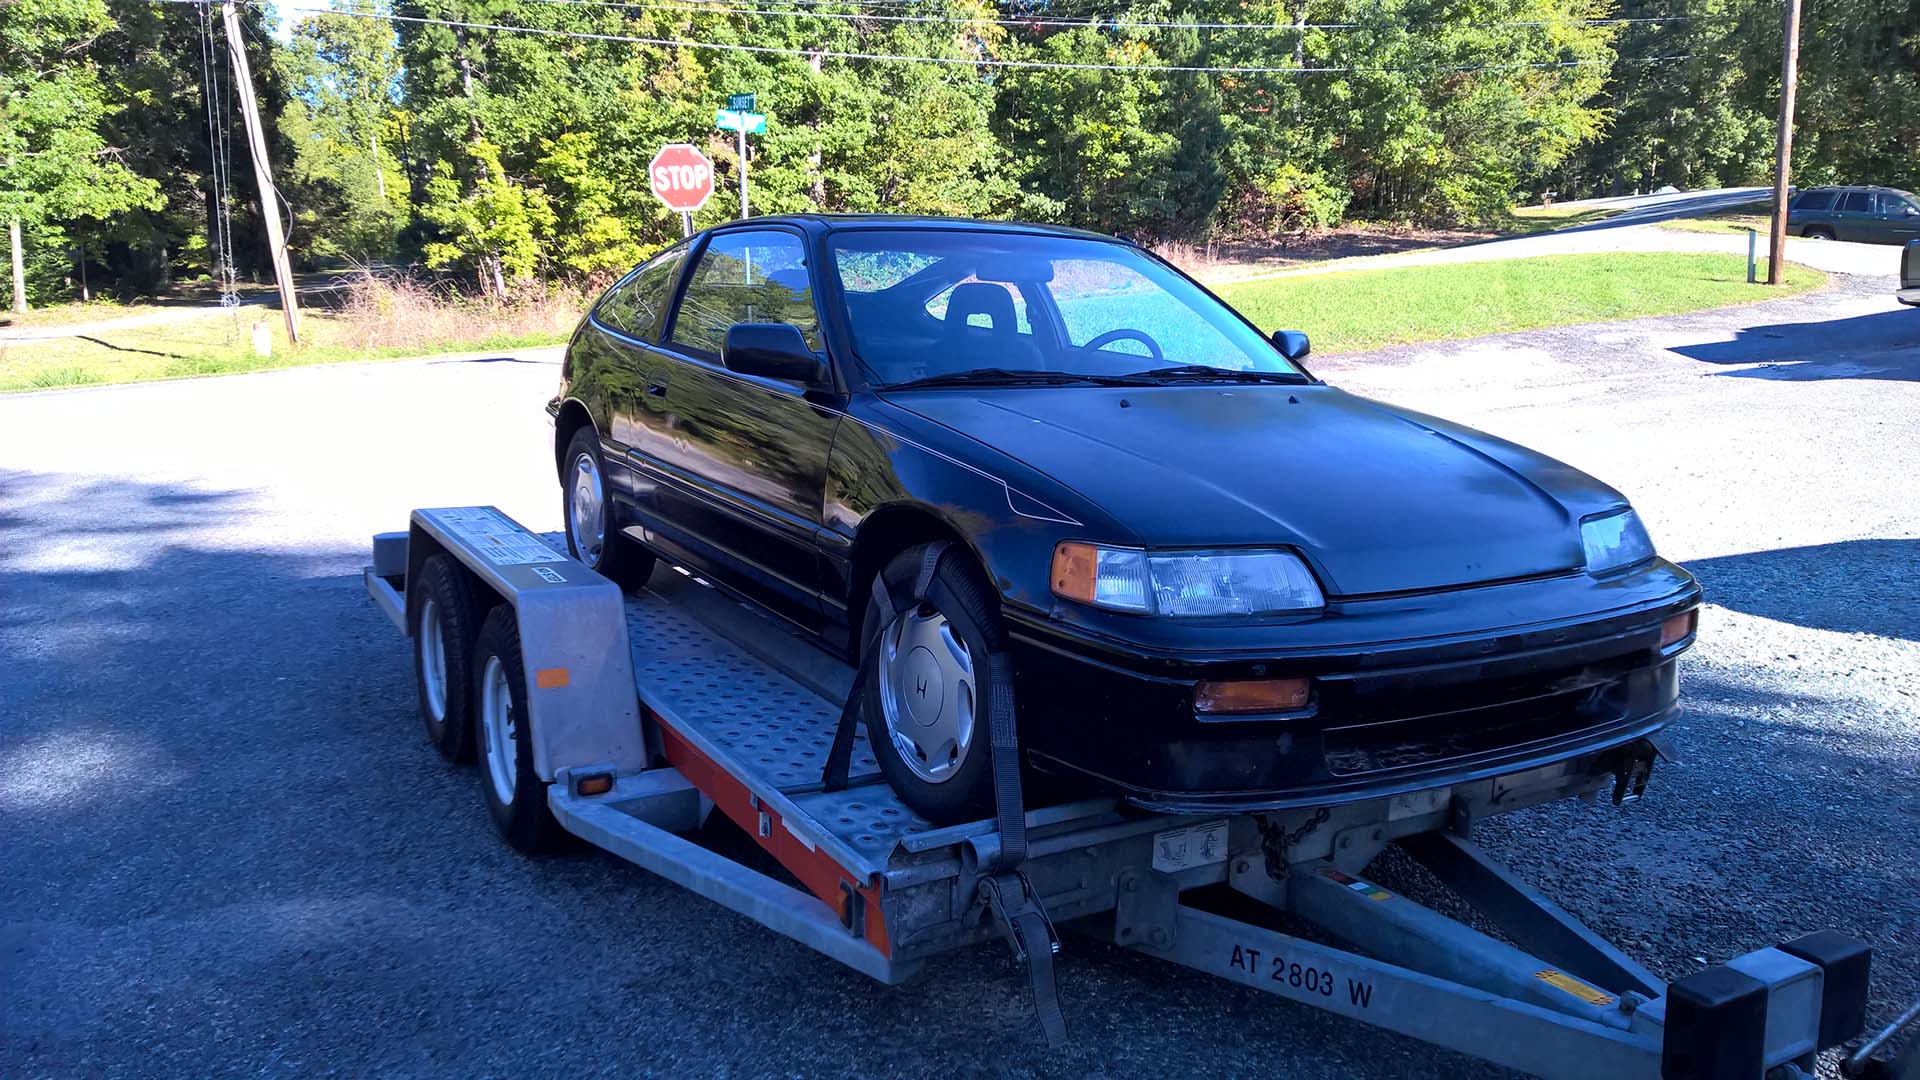 Towing the CRX